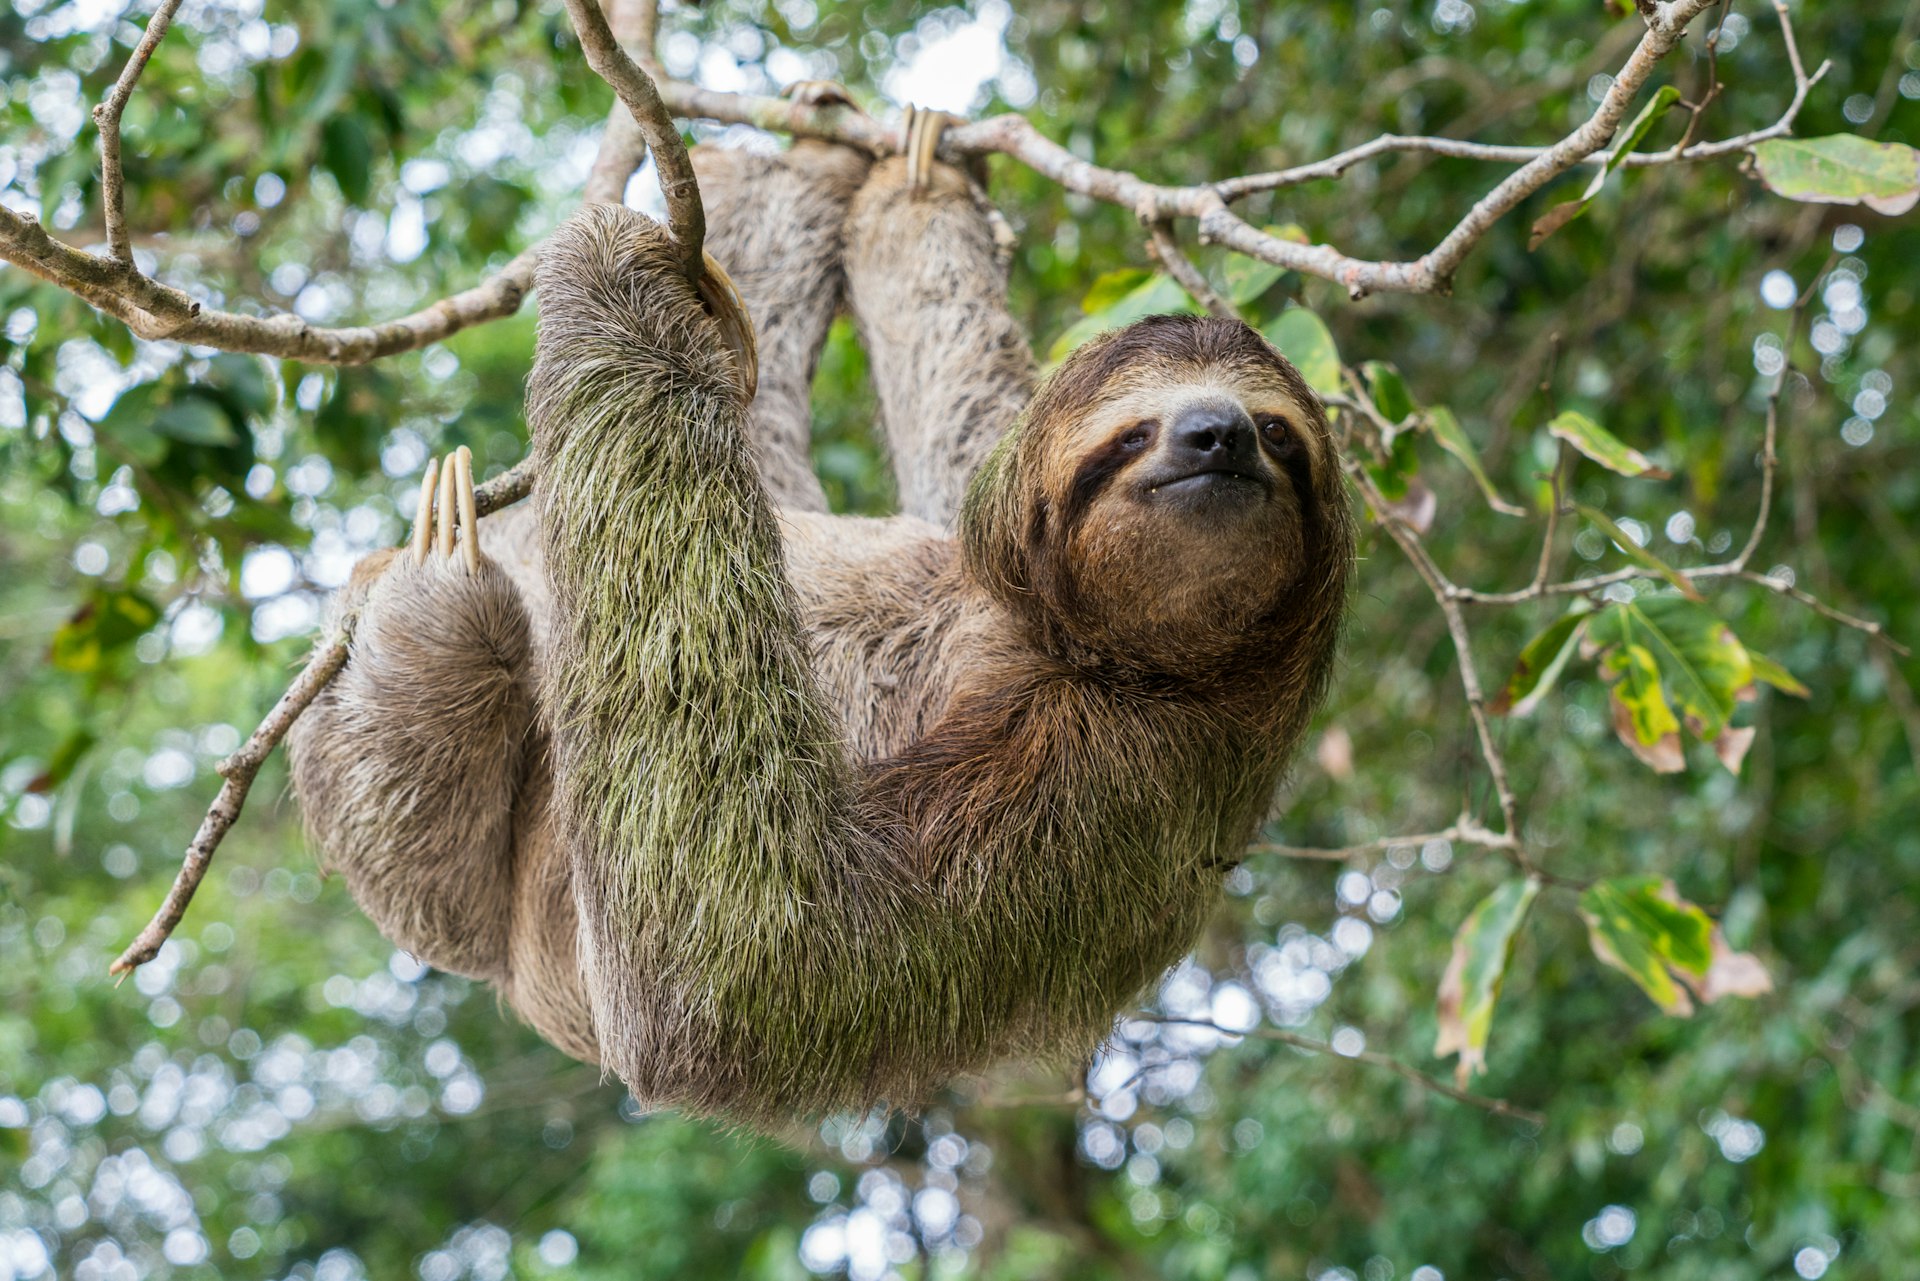 A three-toed sloth hanging from a tree in Costa Rica